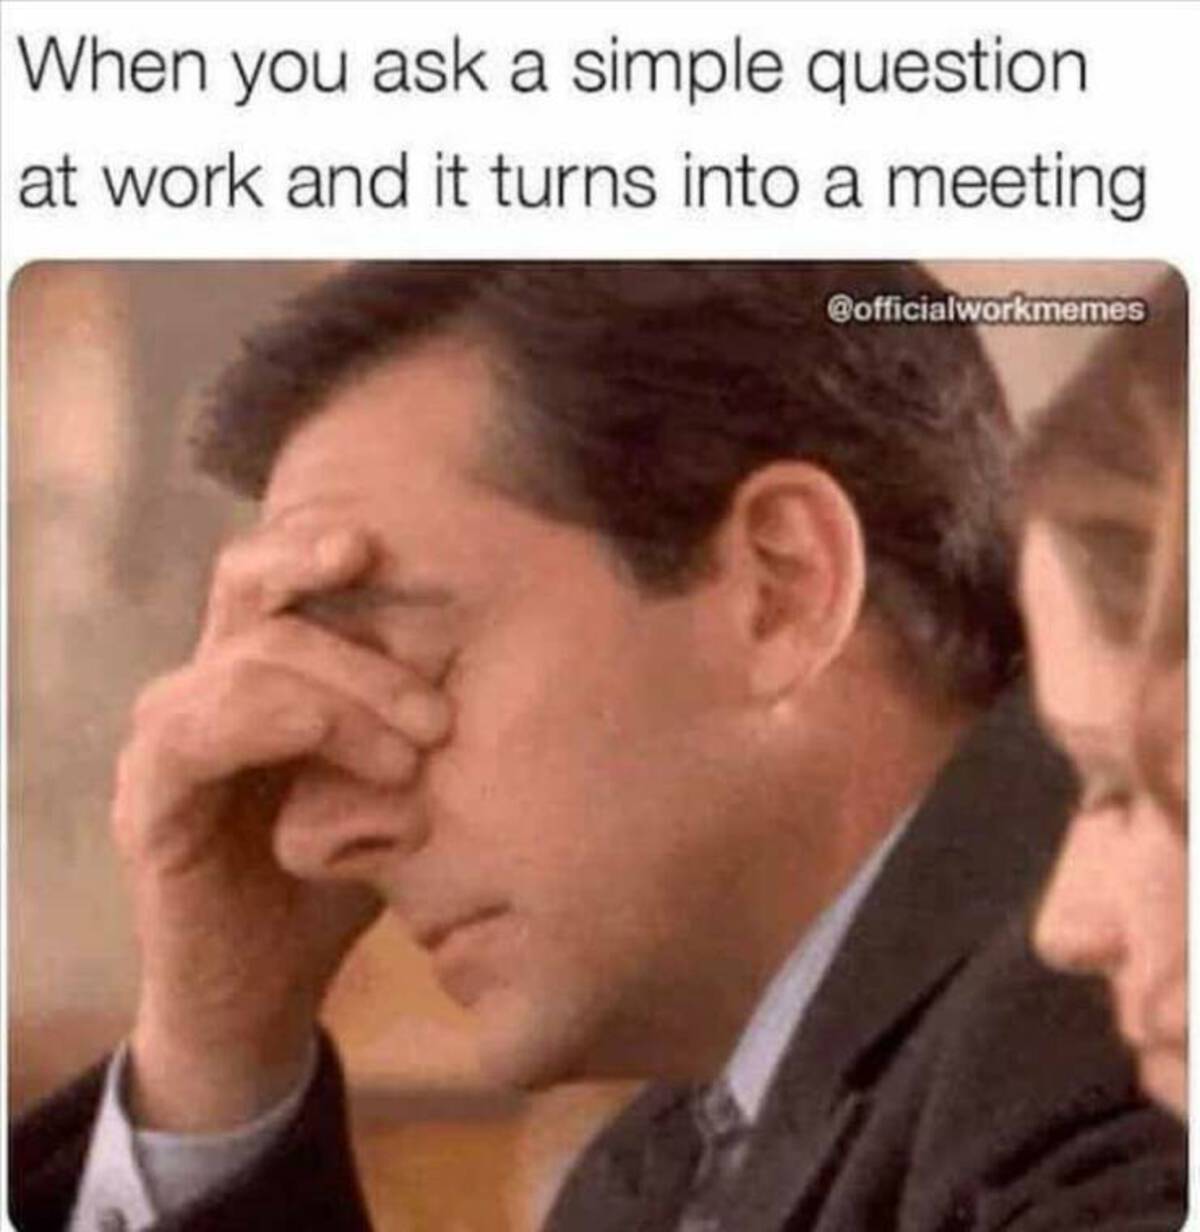 meme when you ask a simple question - When you ask a simple question at work and it turns into a meeting